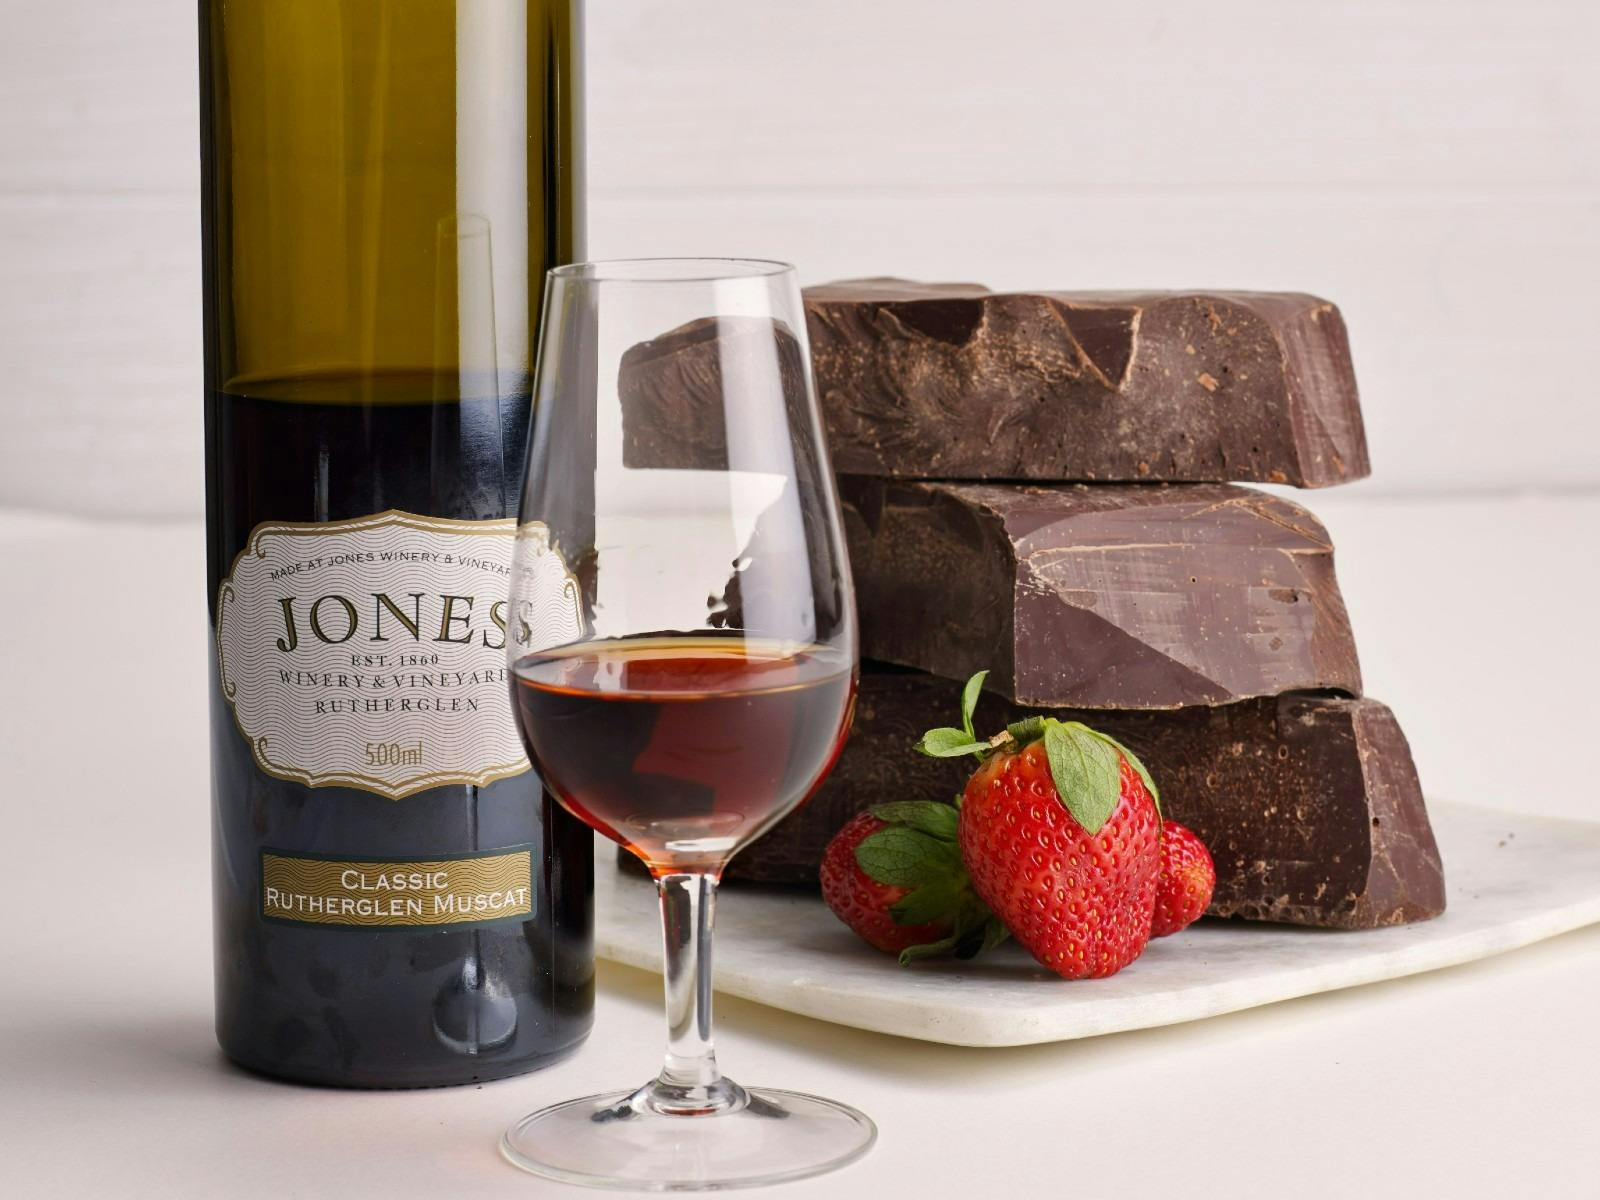 Explore how innovative Muscat can be with Jones’Muscat and food matching set.